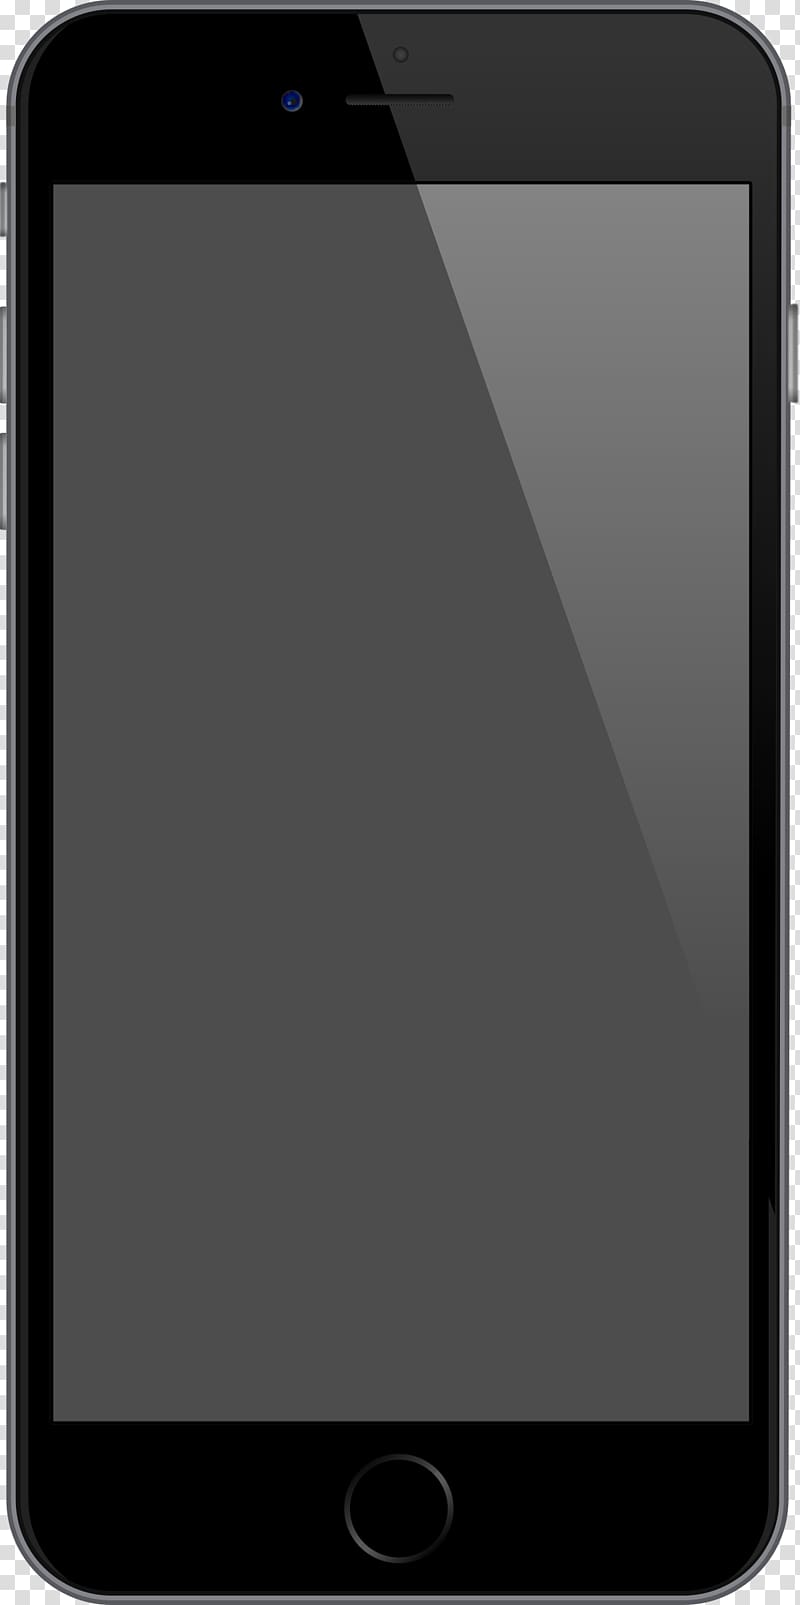 iPhone 8 iPhone 5 iPhone 4S iPhone 6 Plus iPhone 6s Plus, gray frame transparent background PNG clipart